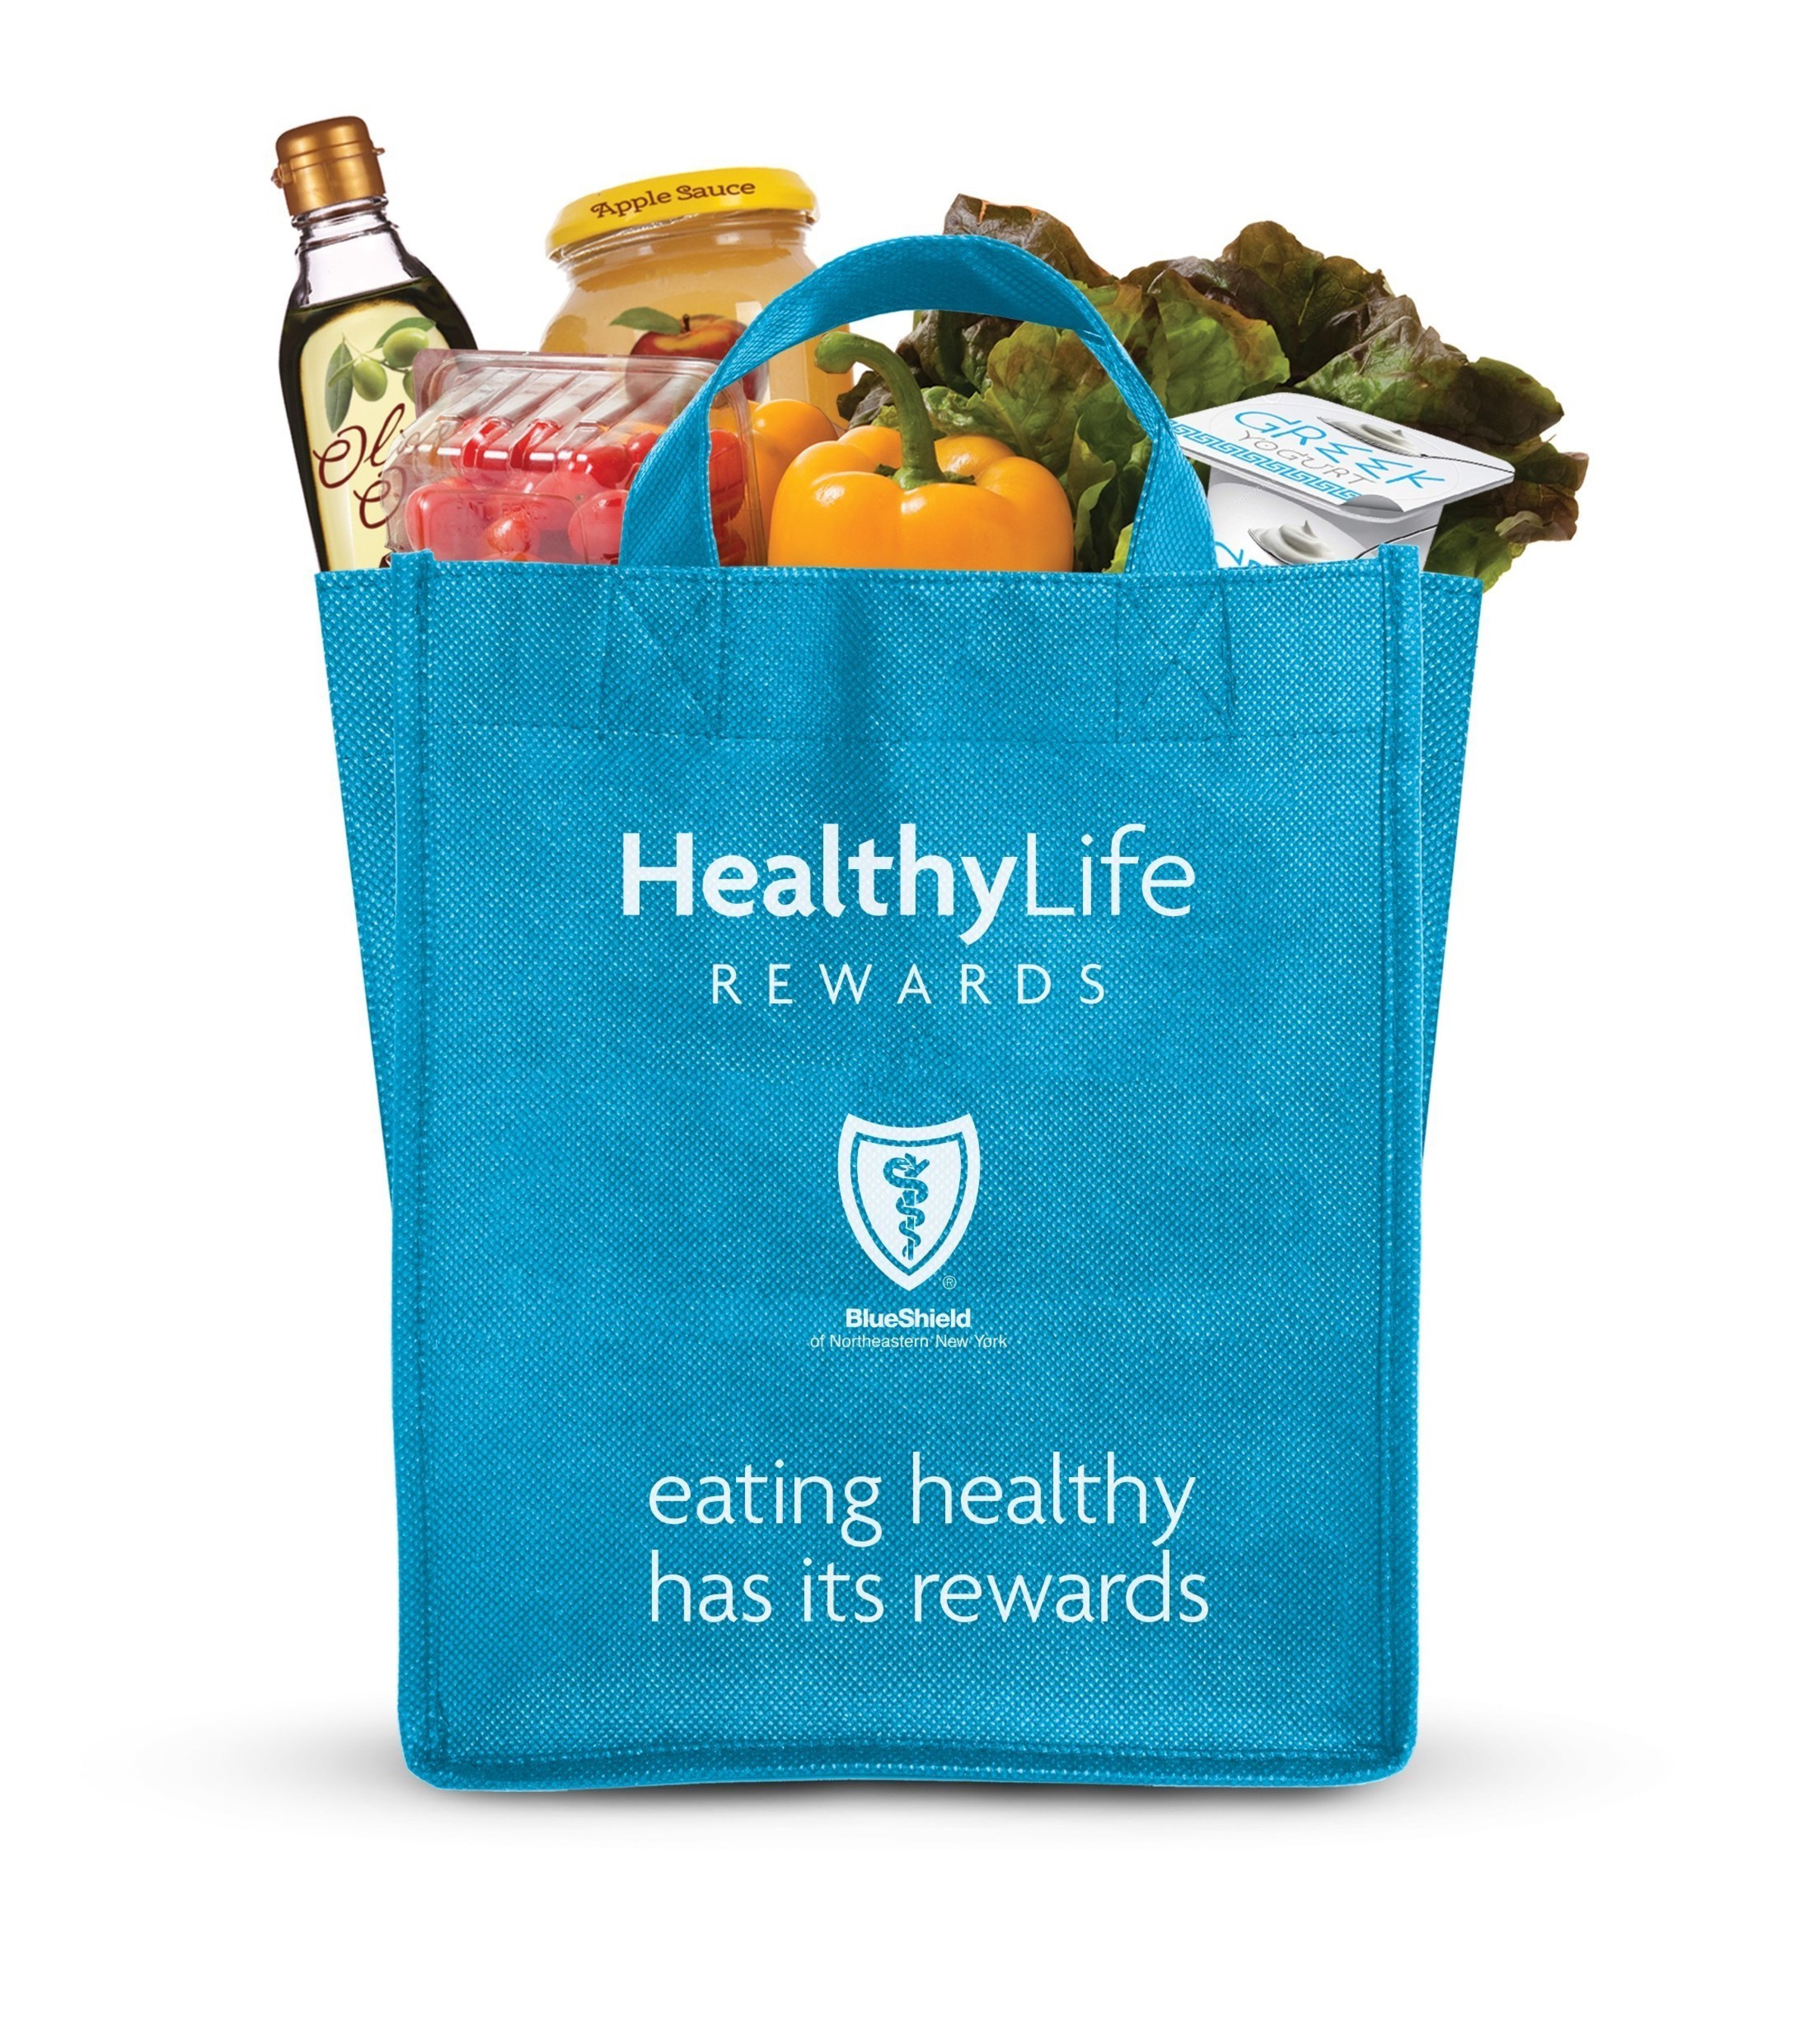 BlueShield of Northeastern New York unveils HealthyLife Rewards, a digital nutrition program powered by NutriSavings that provides educational tools and incentives to more than 50,000 subscriber households in the Capital Region.